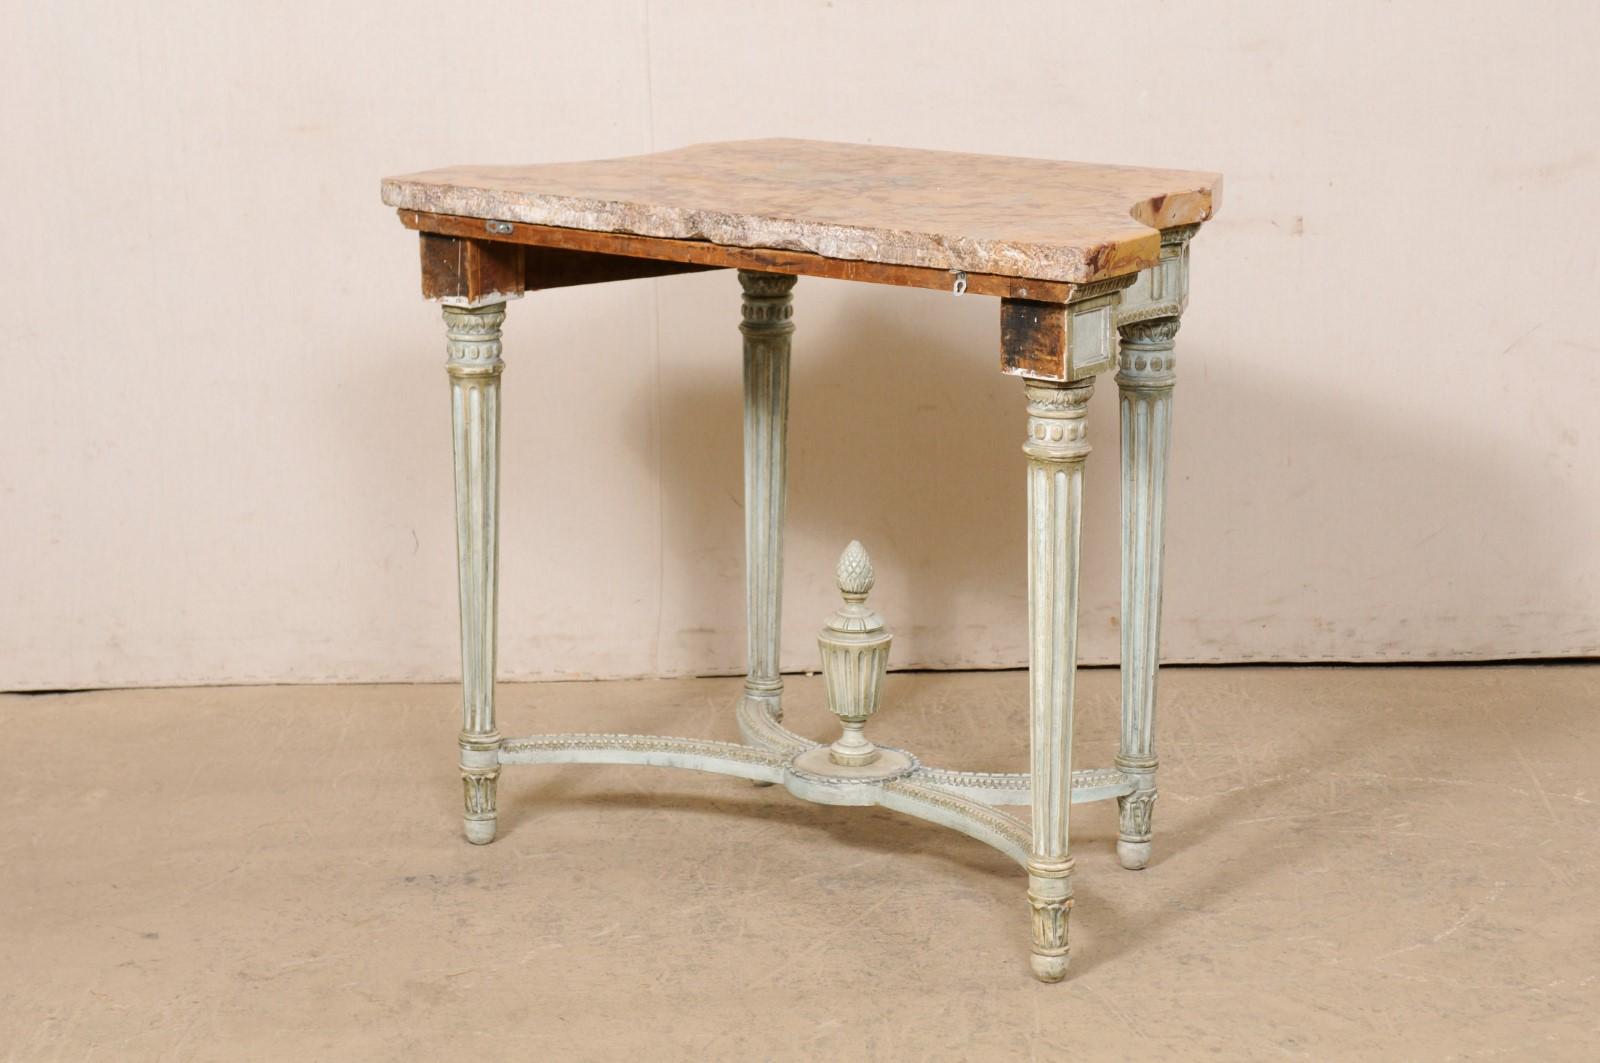 French Neoclassic Period Marble Top Console w/Carved Urn Finial at Underside For Sale 1